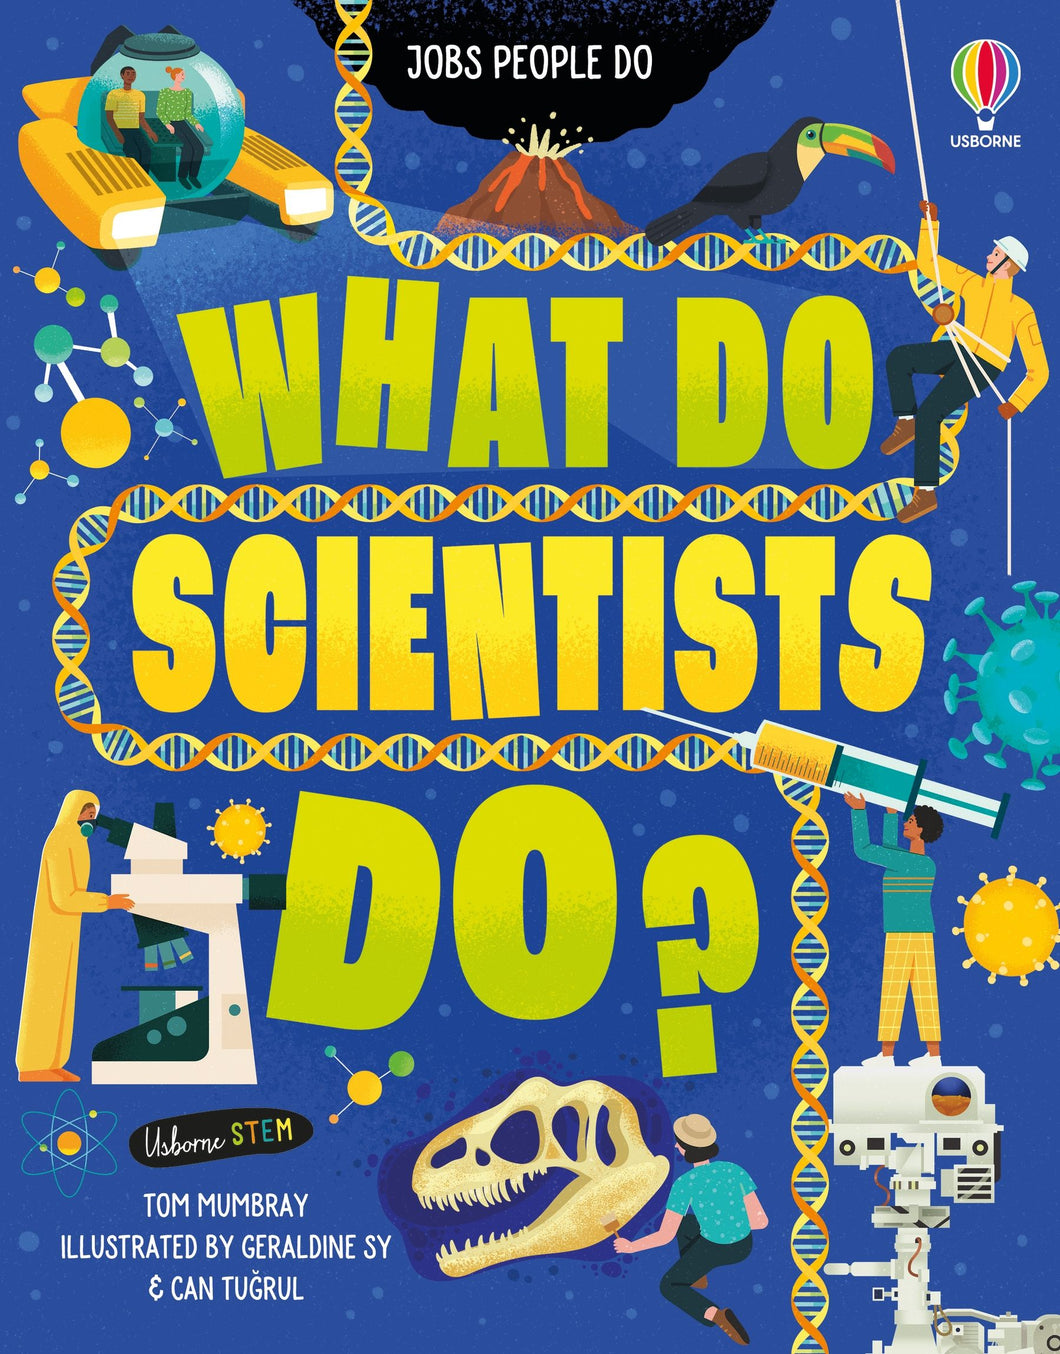 What Do Scientists Do?